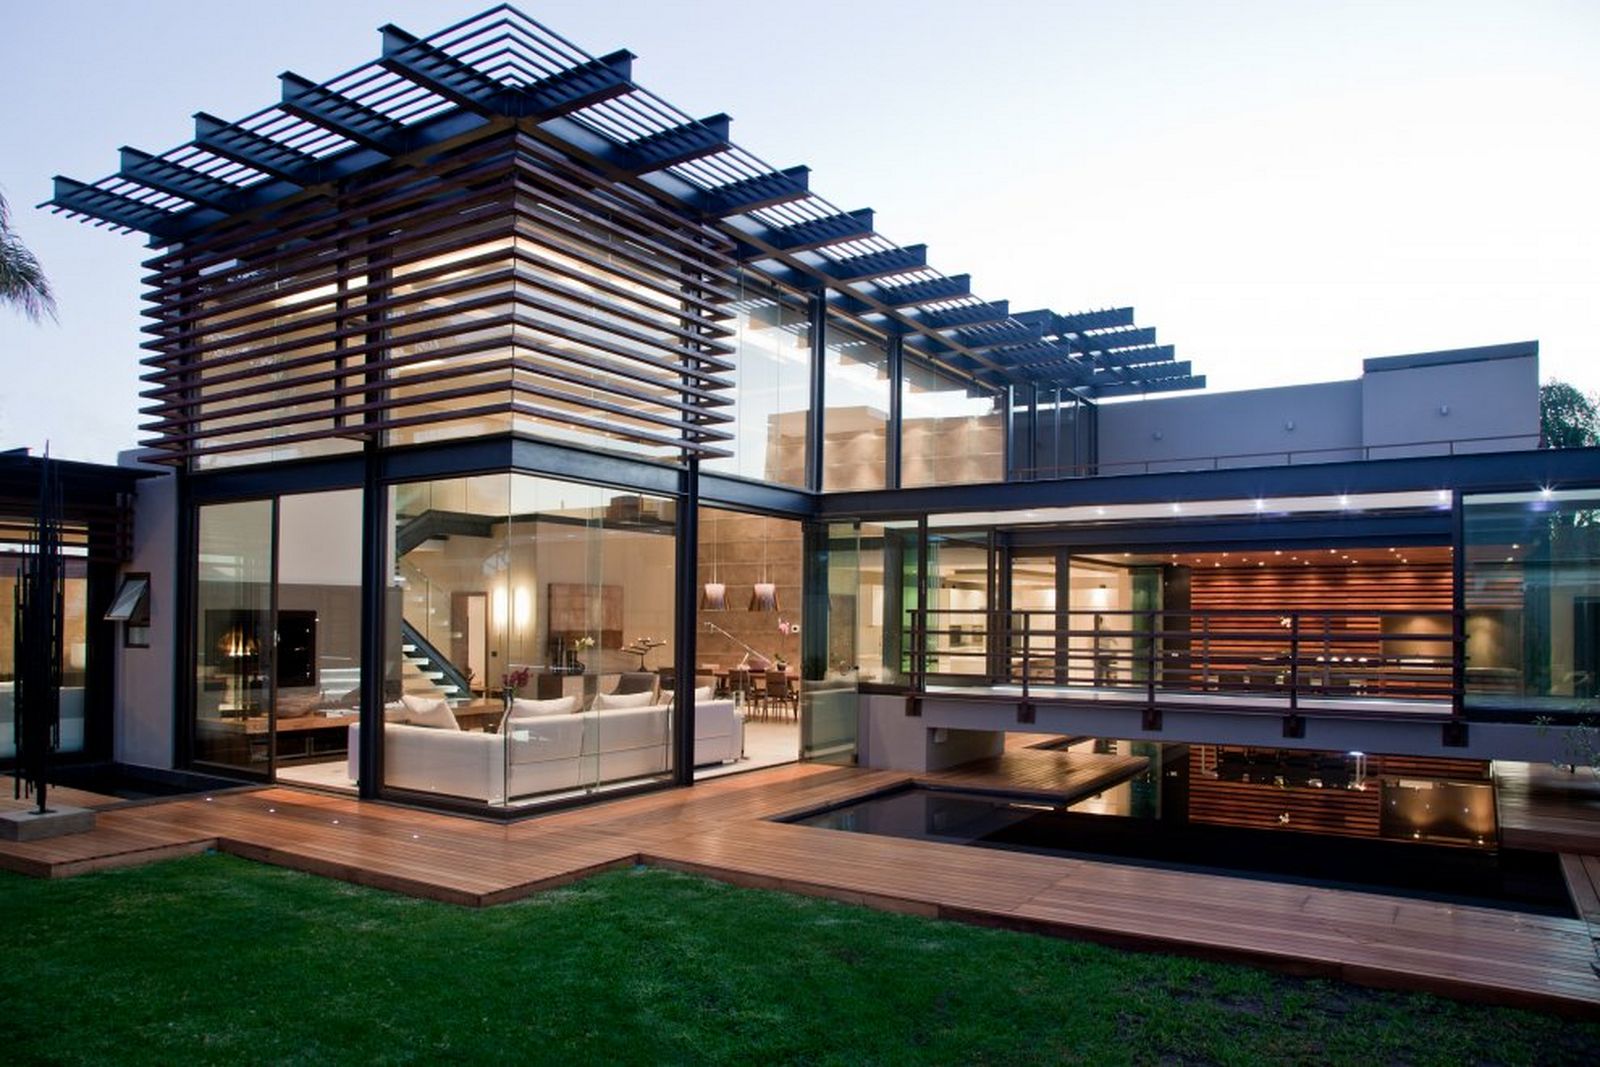 Modern Architectural Solutions for Home Exterior | Architect Magazine